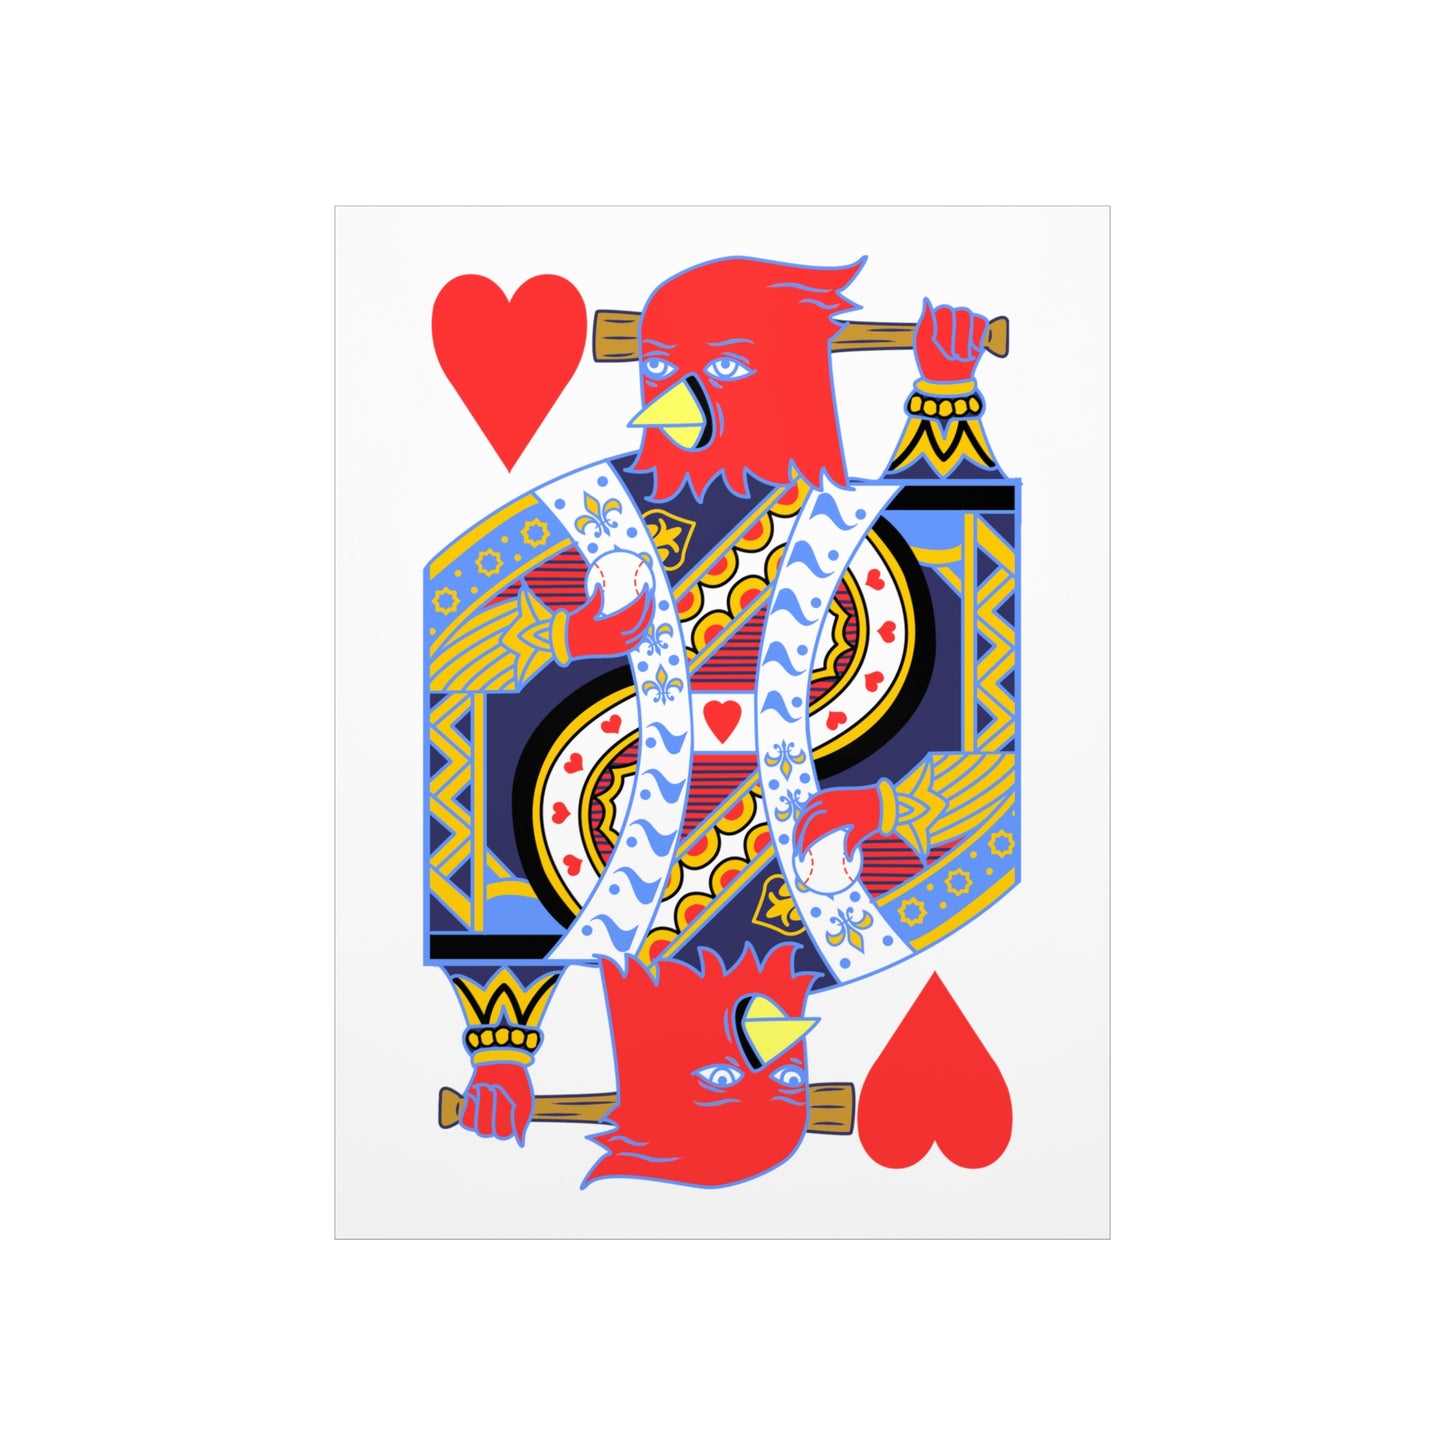 Red Bird of Hearts Poster 18 x 24 in